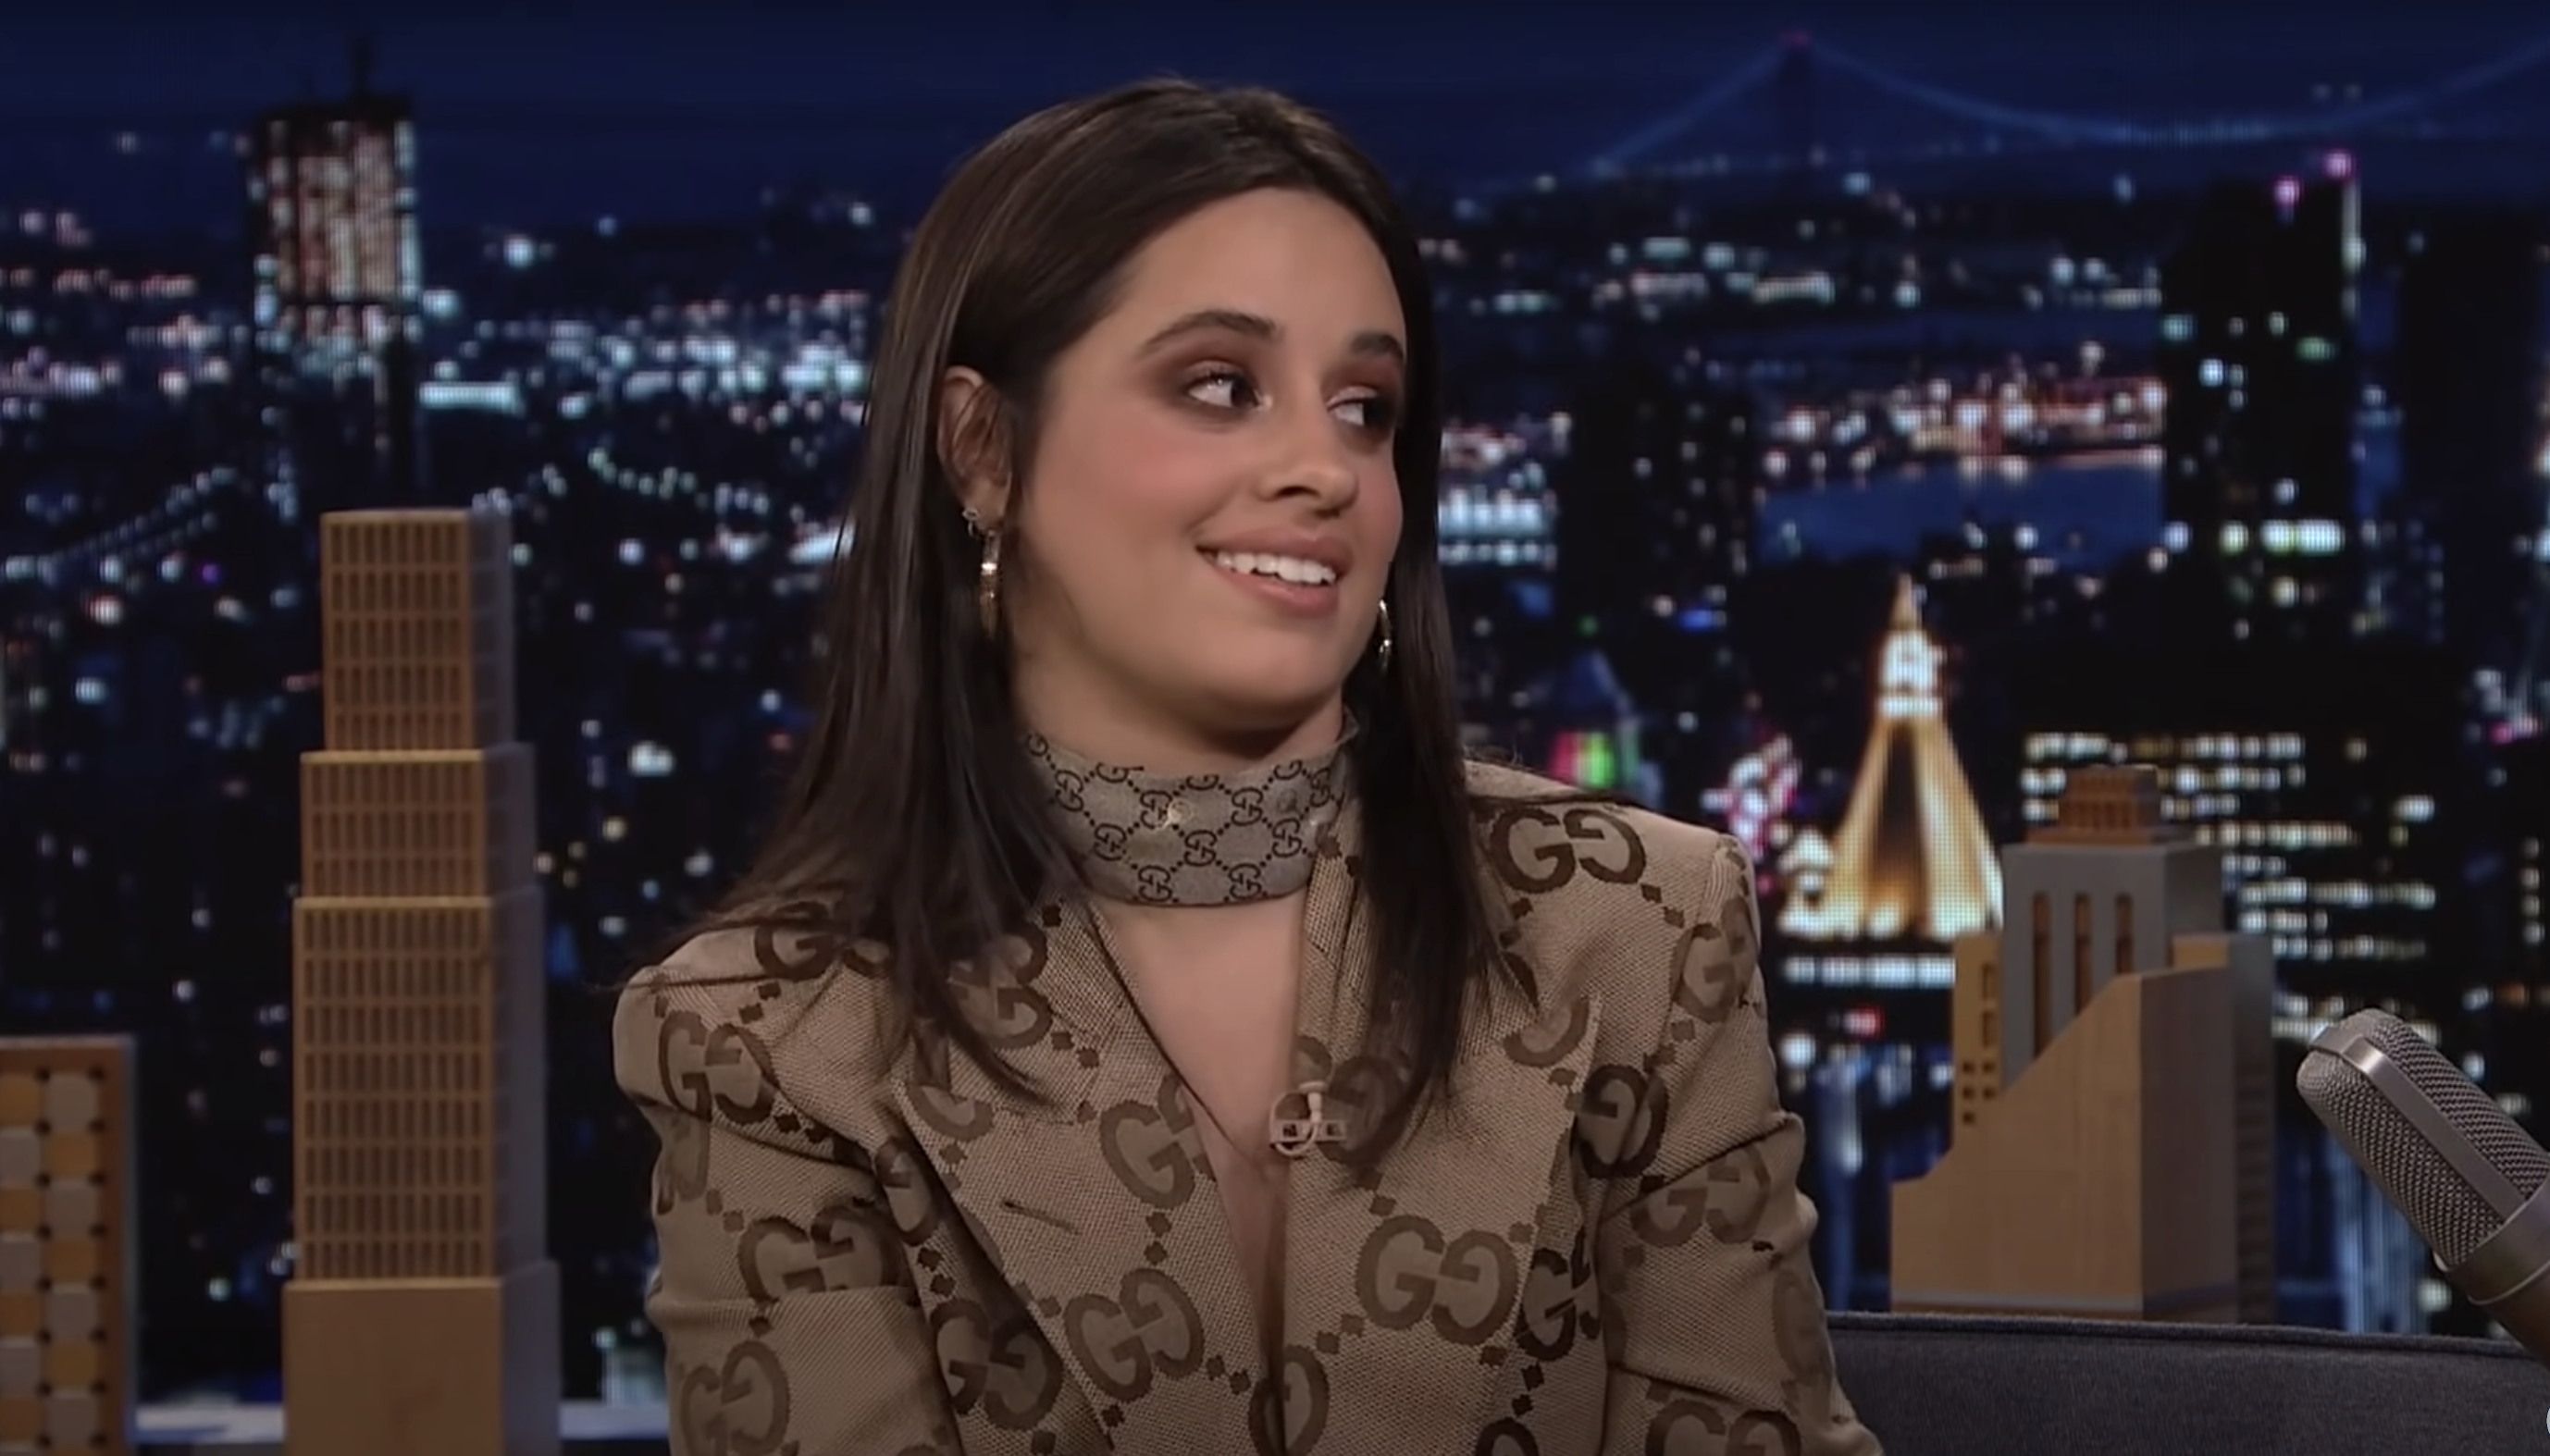 Camila smiling, in patterned outfit with choker, on a talk show set